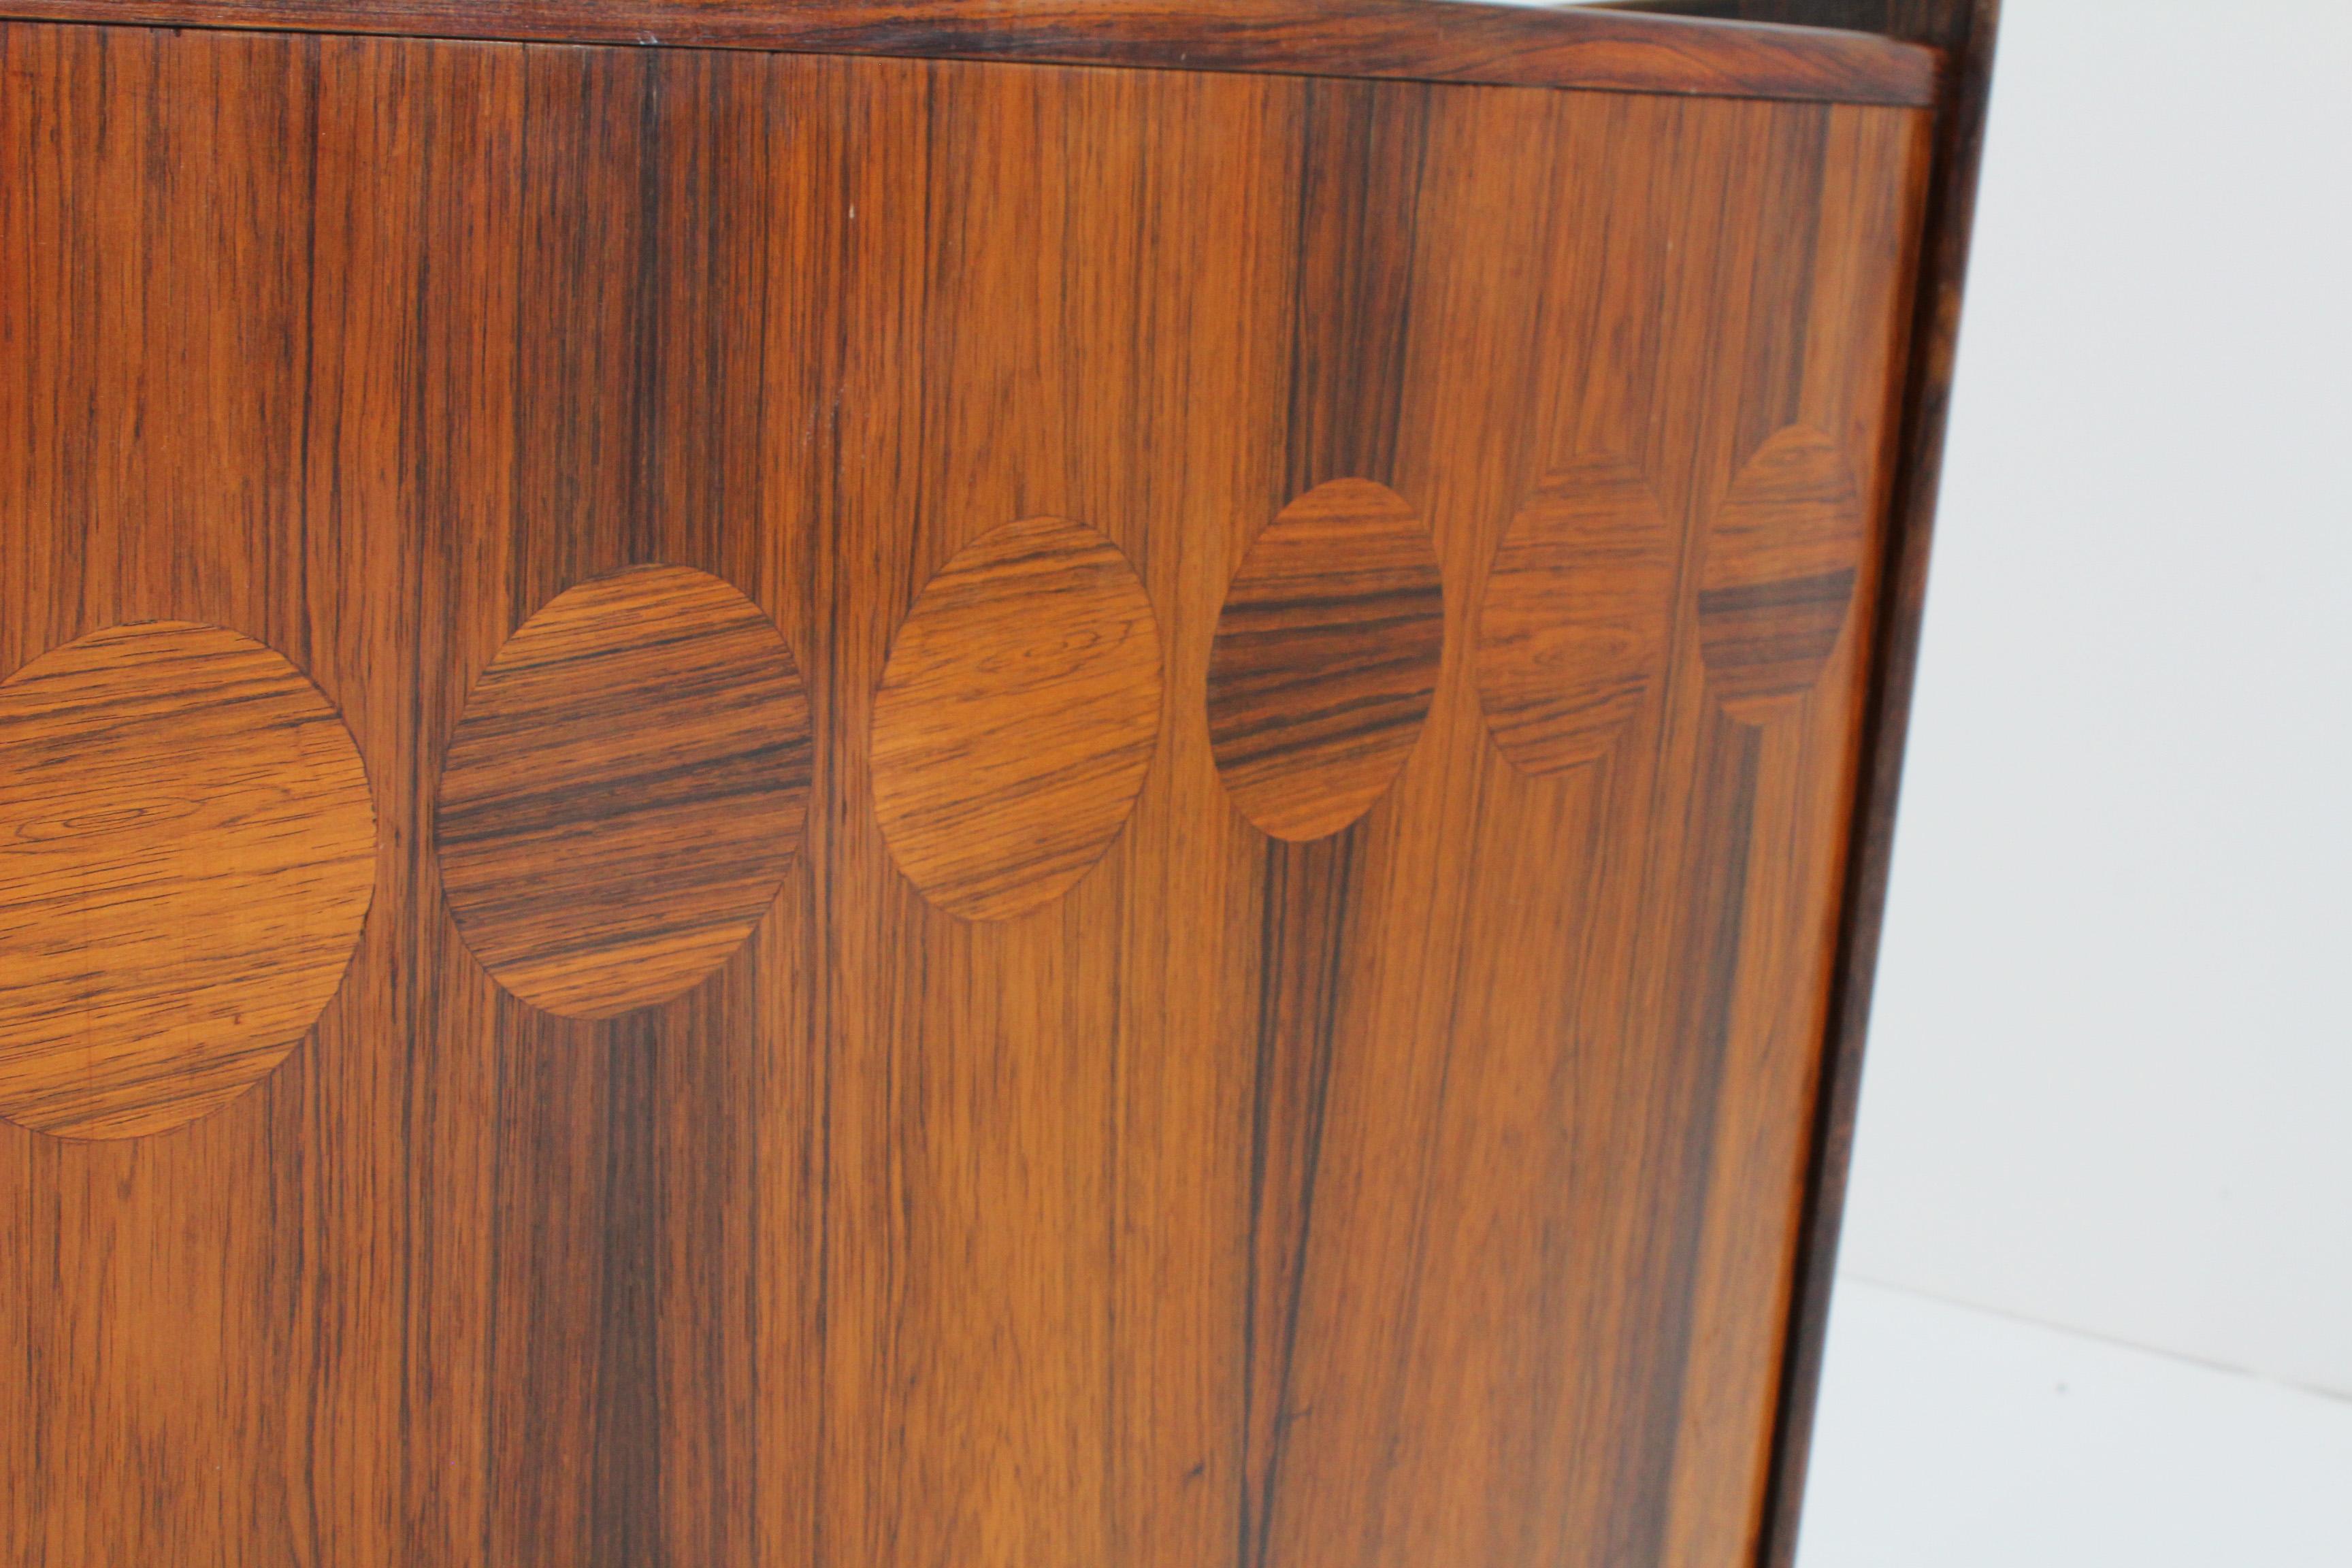 Vintage bar cabinet in rosewood veneer. Designed by Johannes Andersen for Skaaning & Søn , Model SK 661. Made in Denmark in the 1960s. A beautiful piece of craftmanship. Very decorative bar excecuted in rosewood. 

Your guests can sit on bar